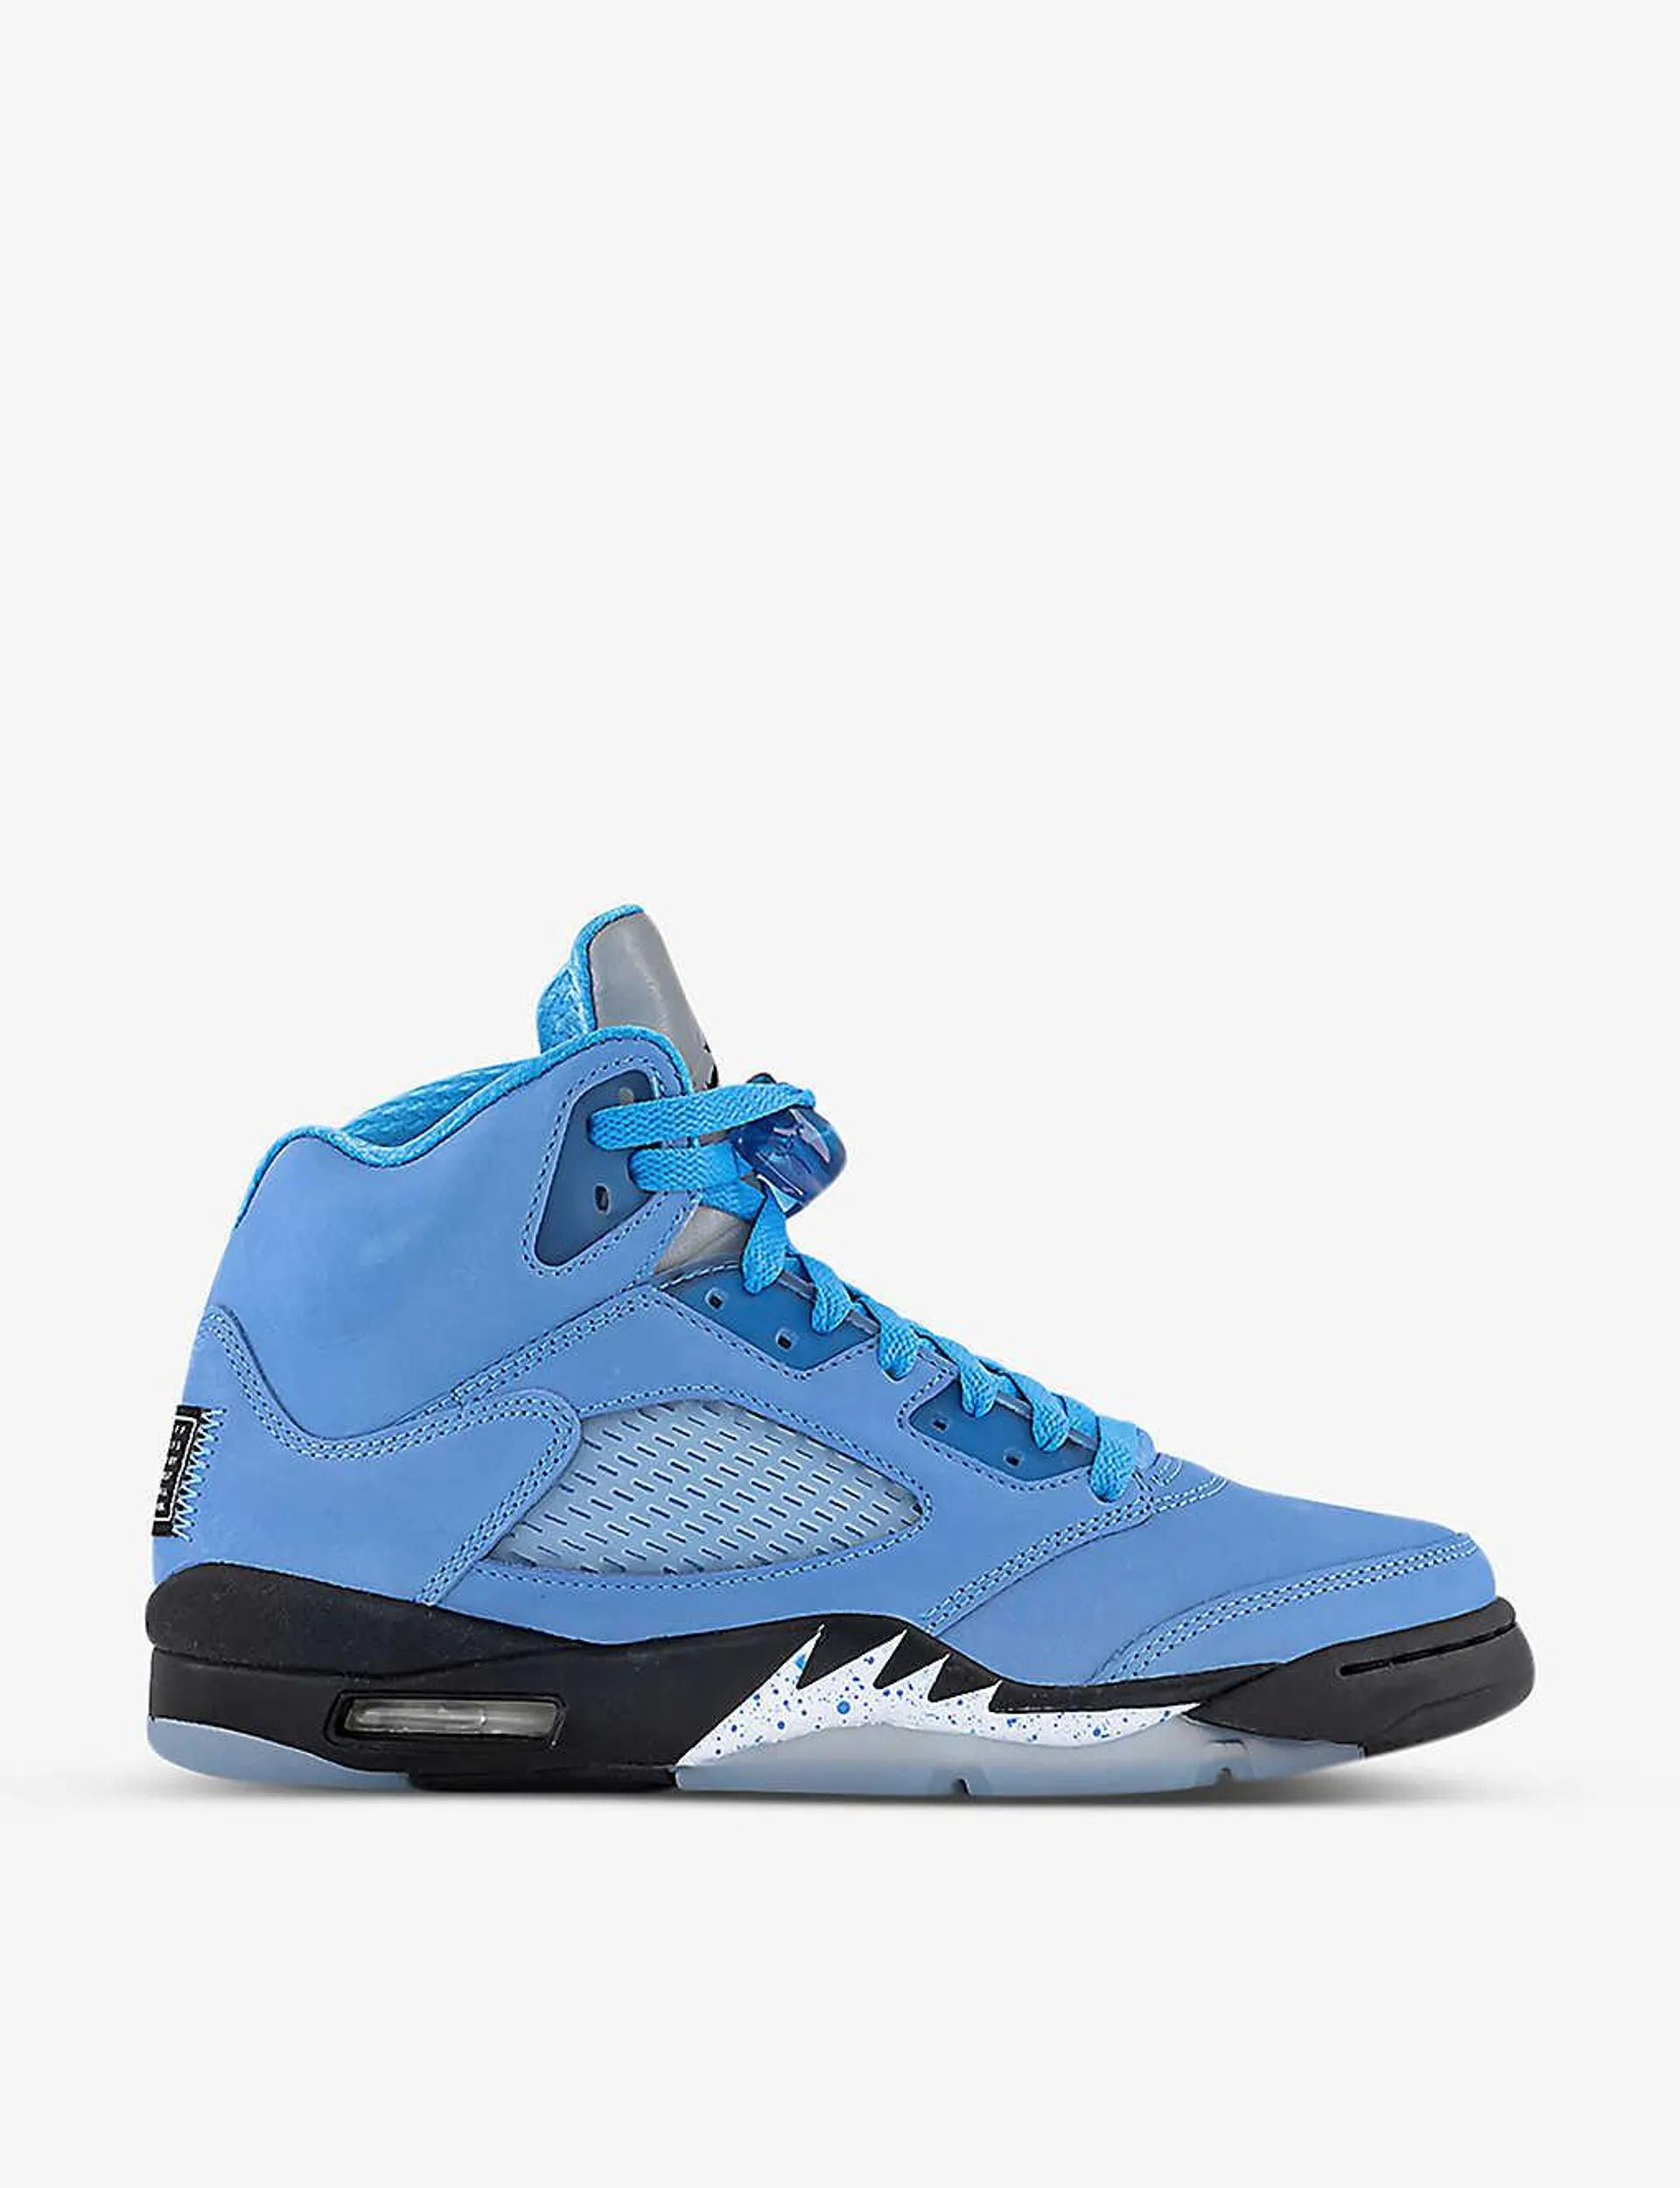 Air Jordan 5 leather and mesh high-top trainers